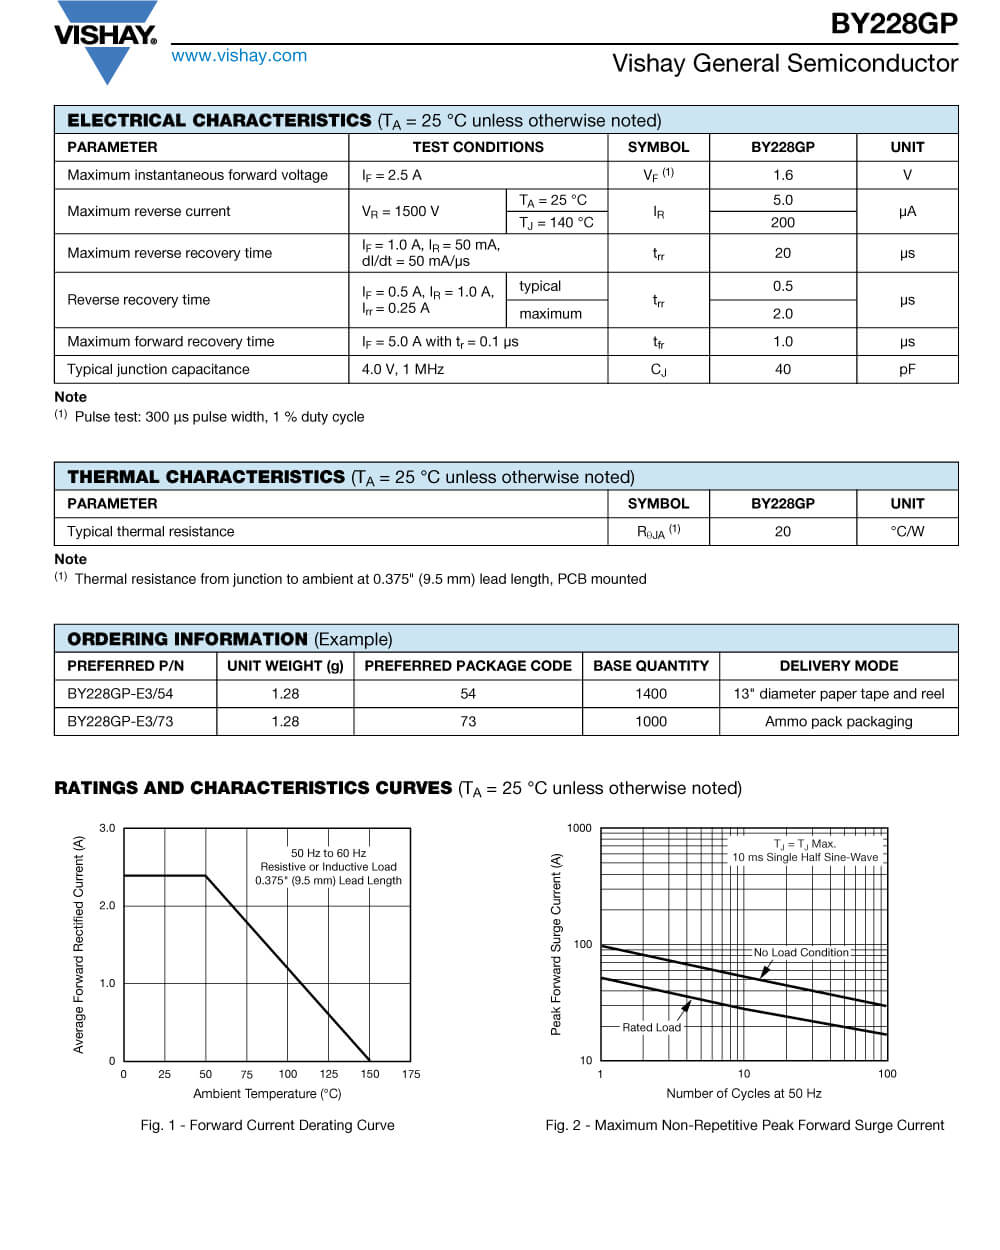 Specifications Of BY228GP-E3/73